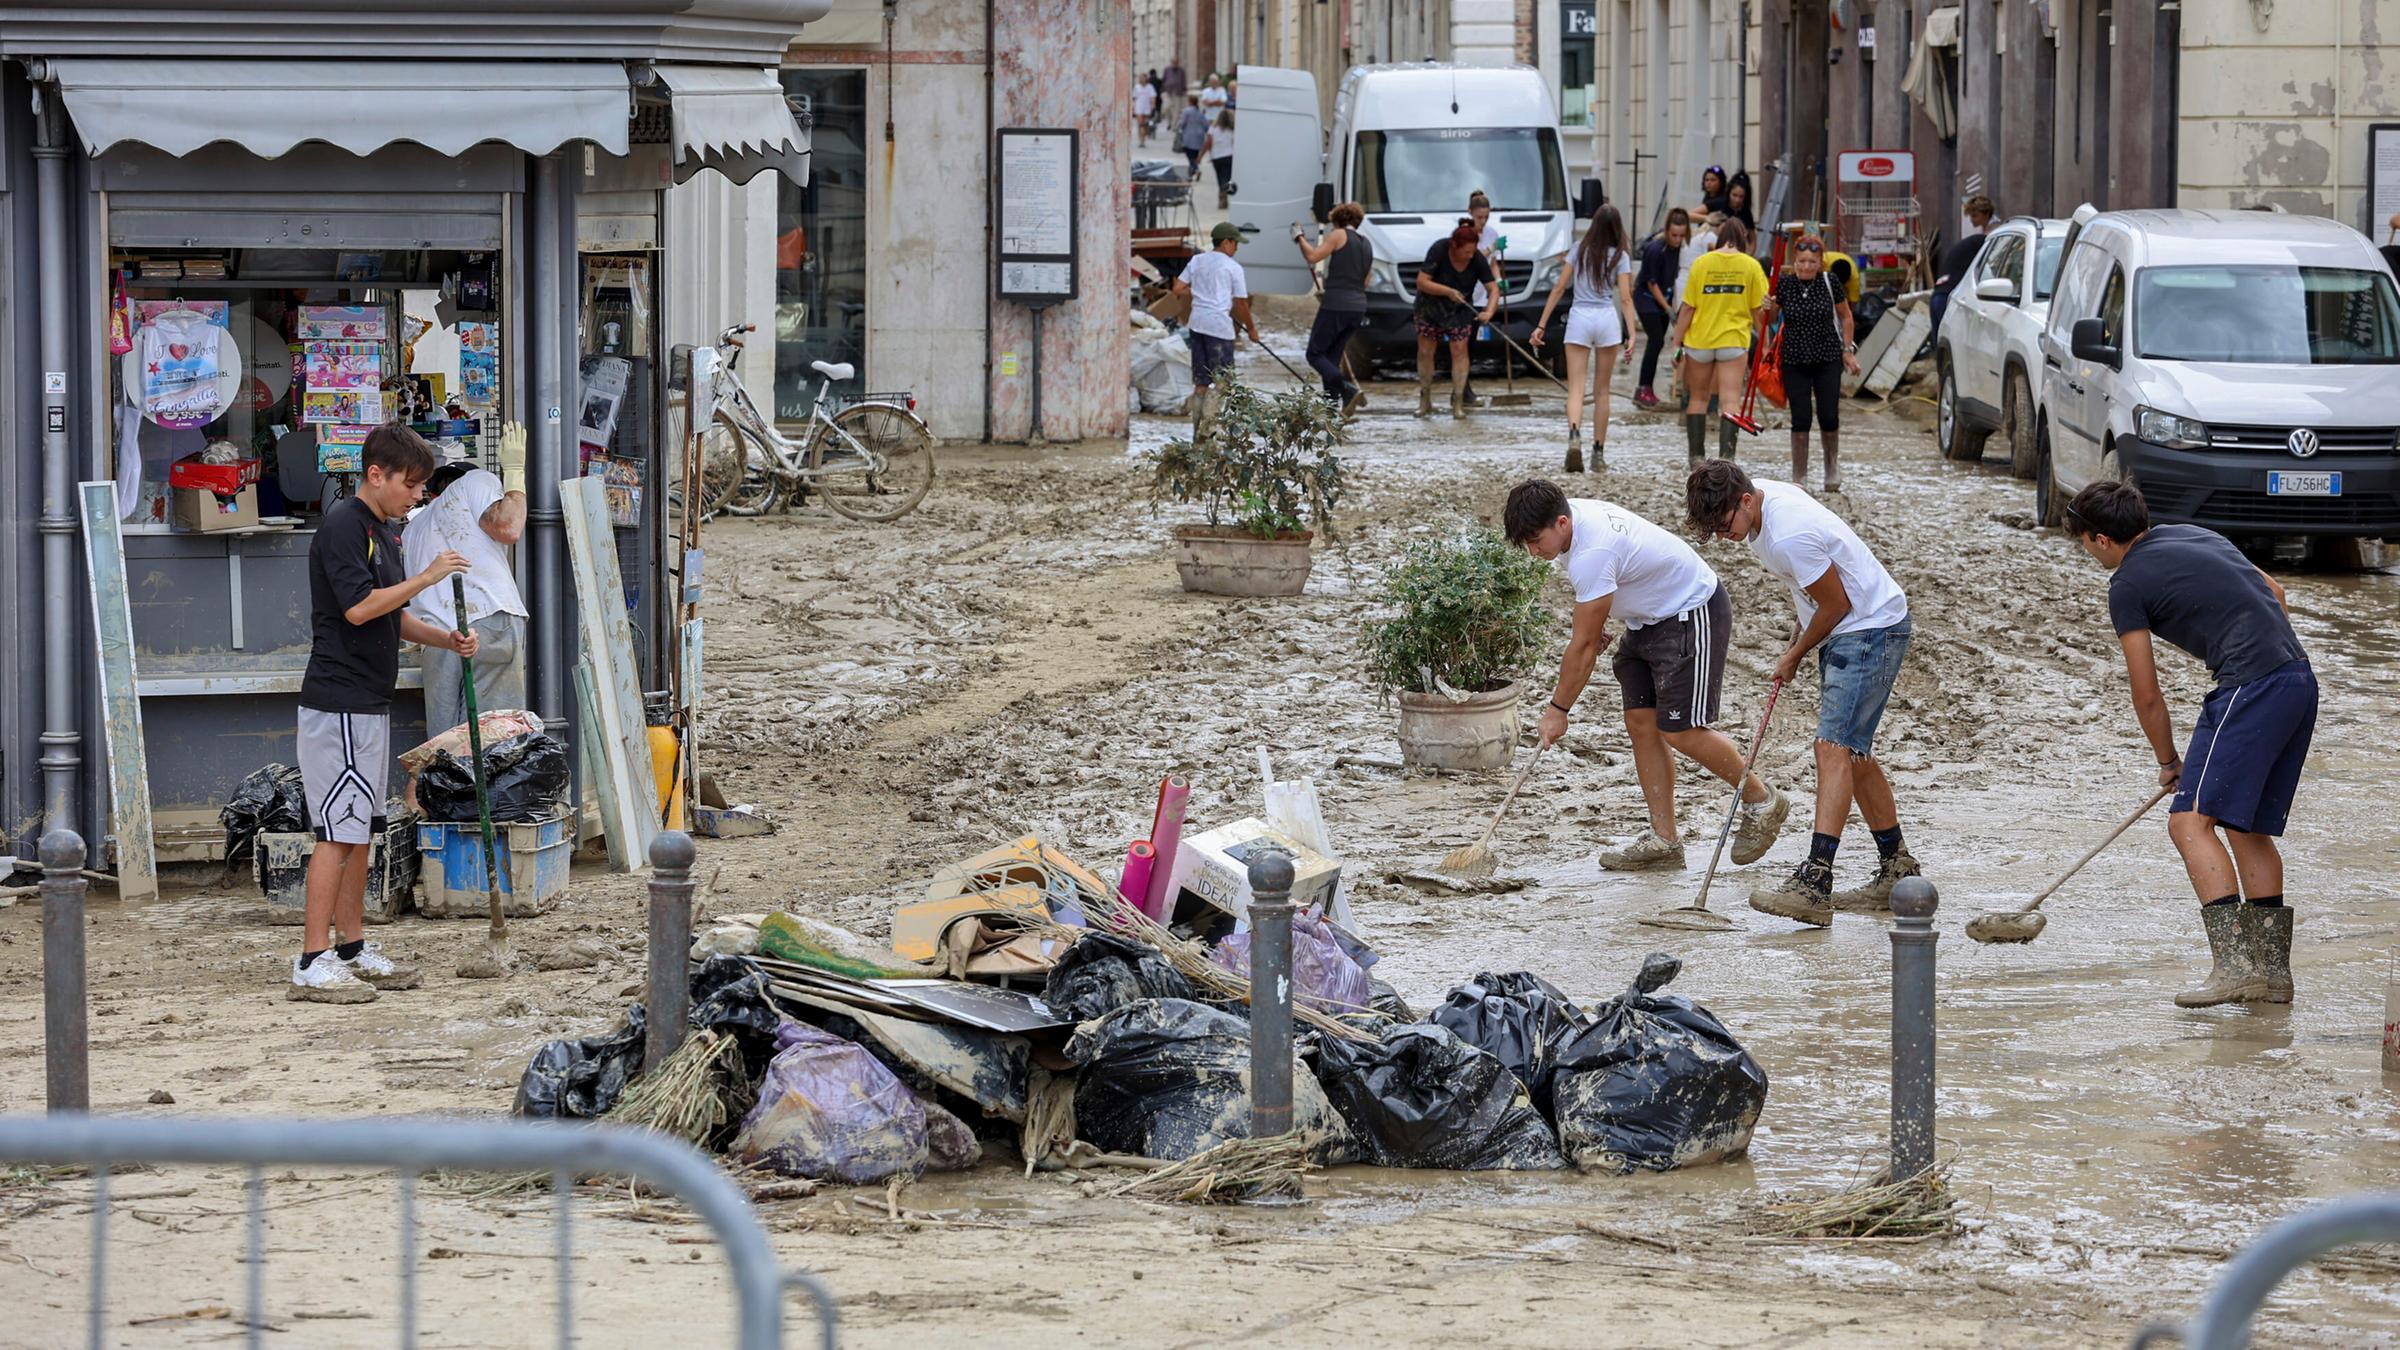 Following the flooding in central Italy, the first clean-up efforts began on the streets of Senigallia.